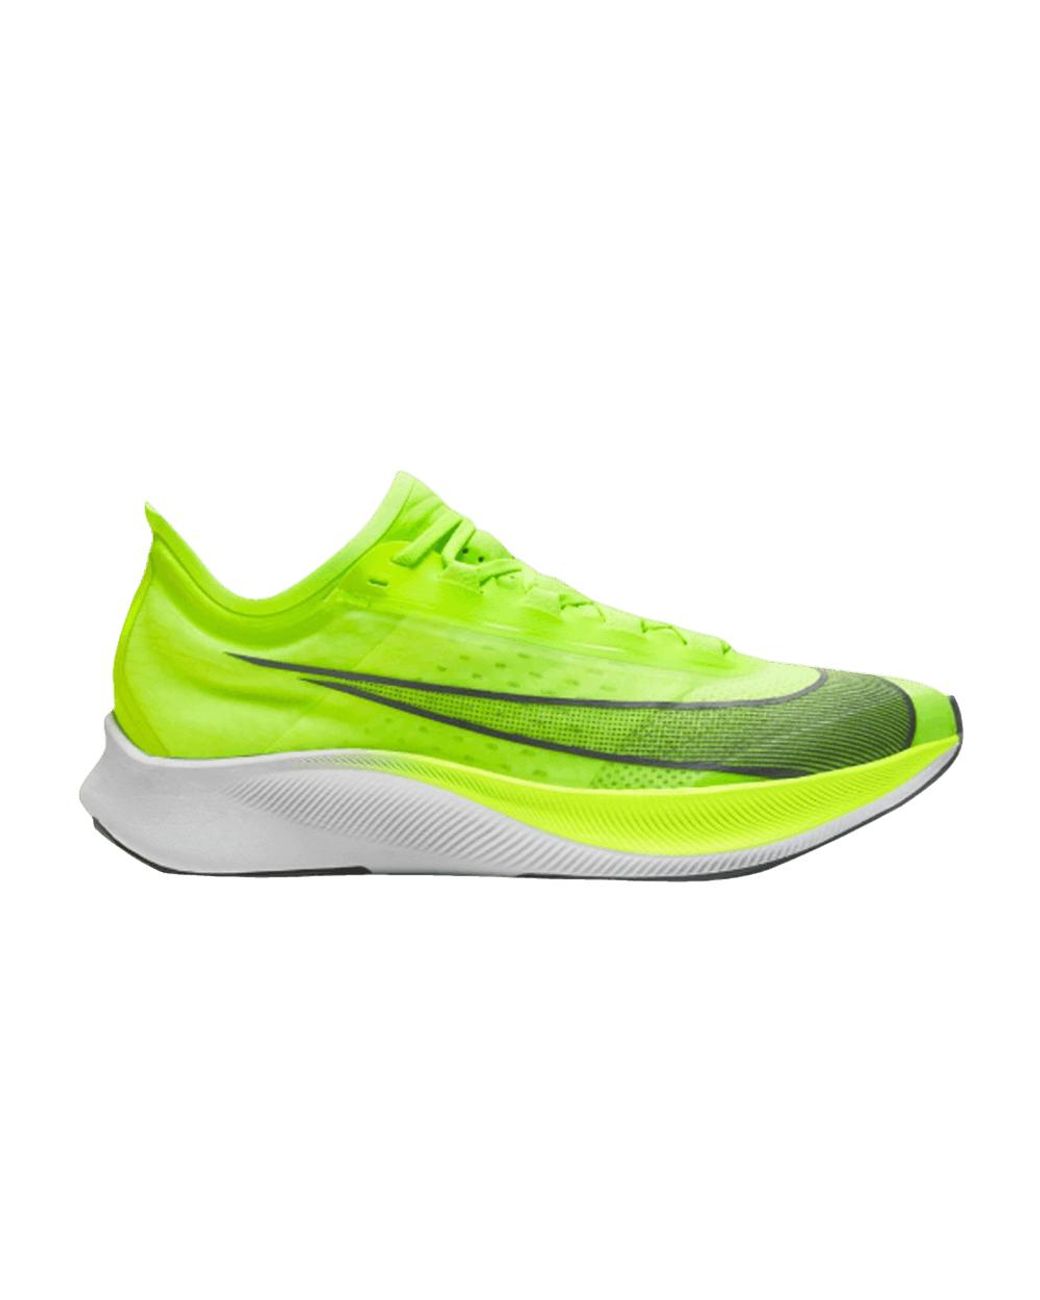 Nike Zoom Fly 3 in Yellow for Men - Lyst